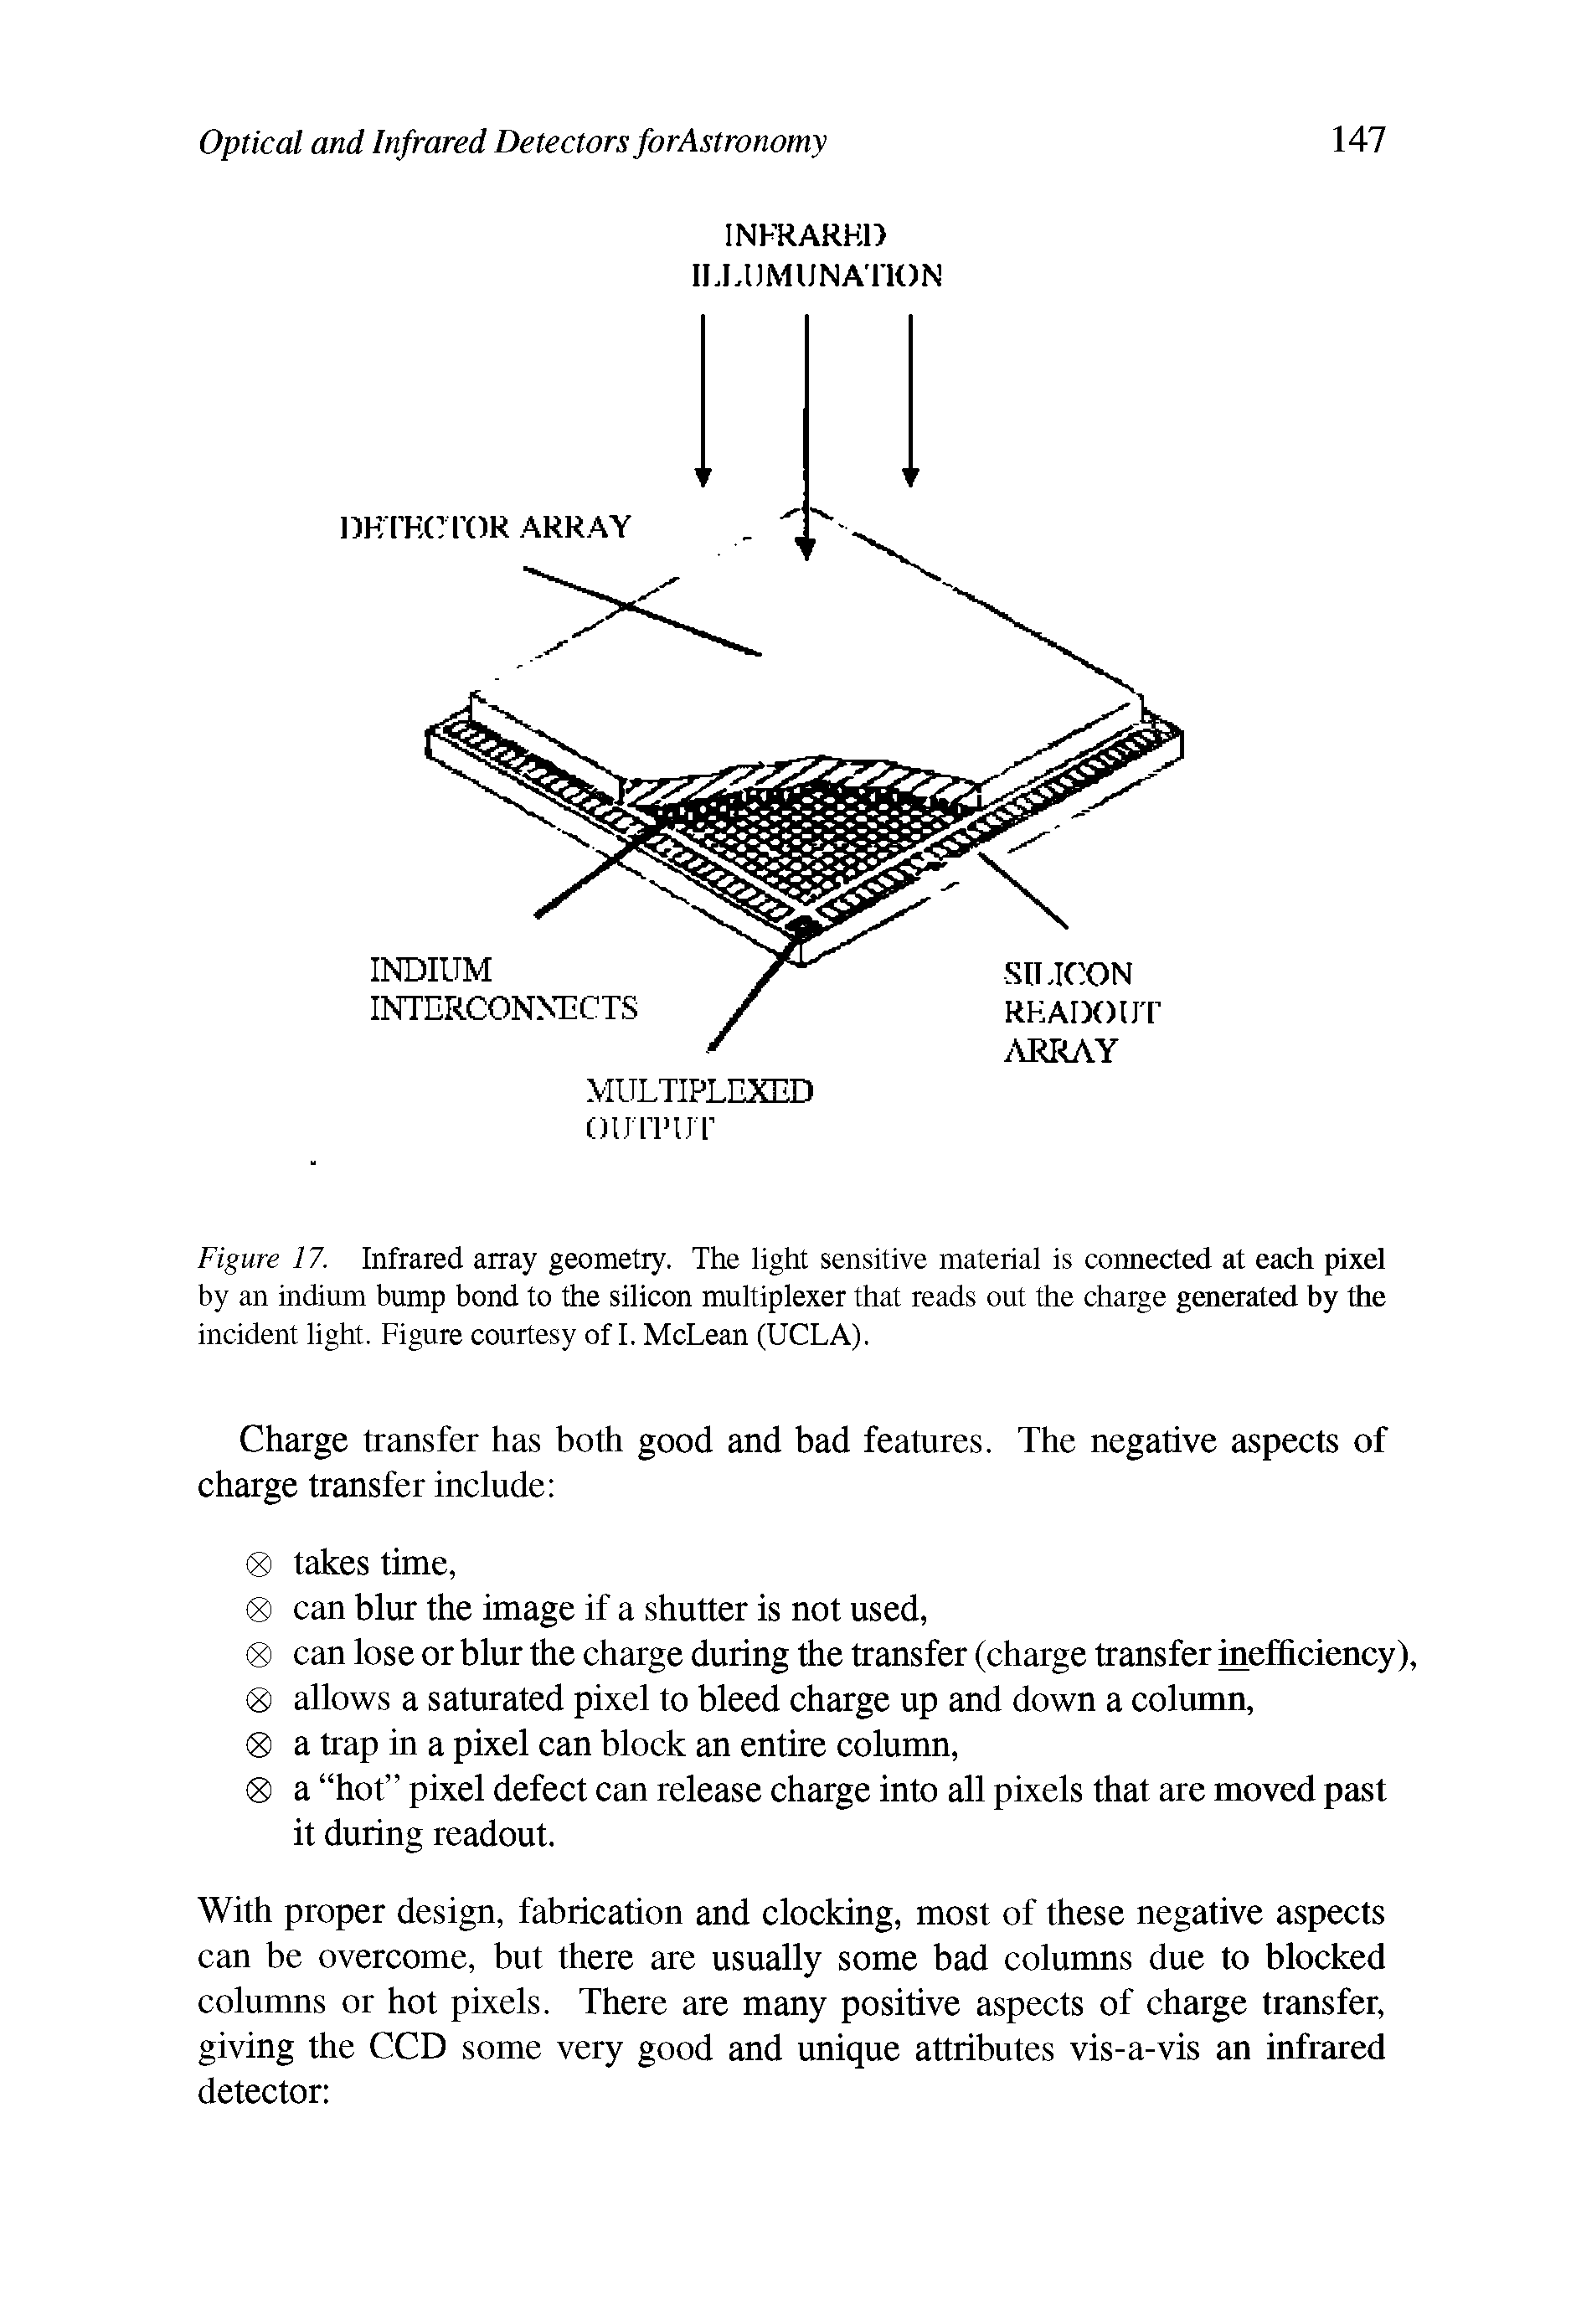 Figure 17. Infrared array geometry. The light sensitive material is connected at each pixel by an indium bump bond to the silicon multiplexer that reads out the charge generated by the incident light. Figure courtesy of I. McLean (UCLA).